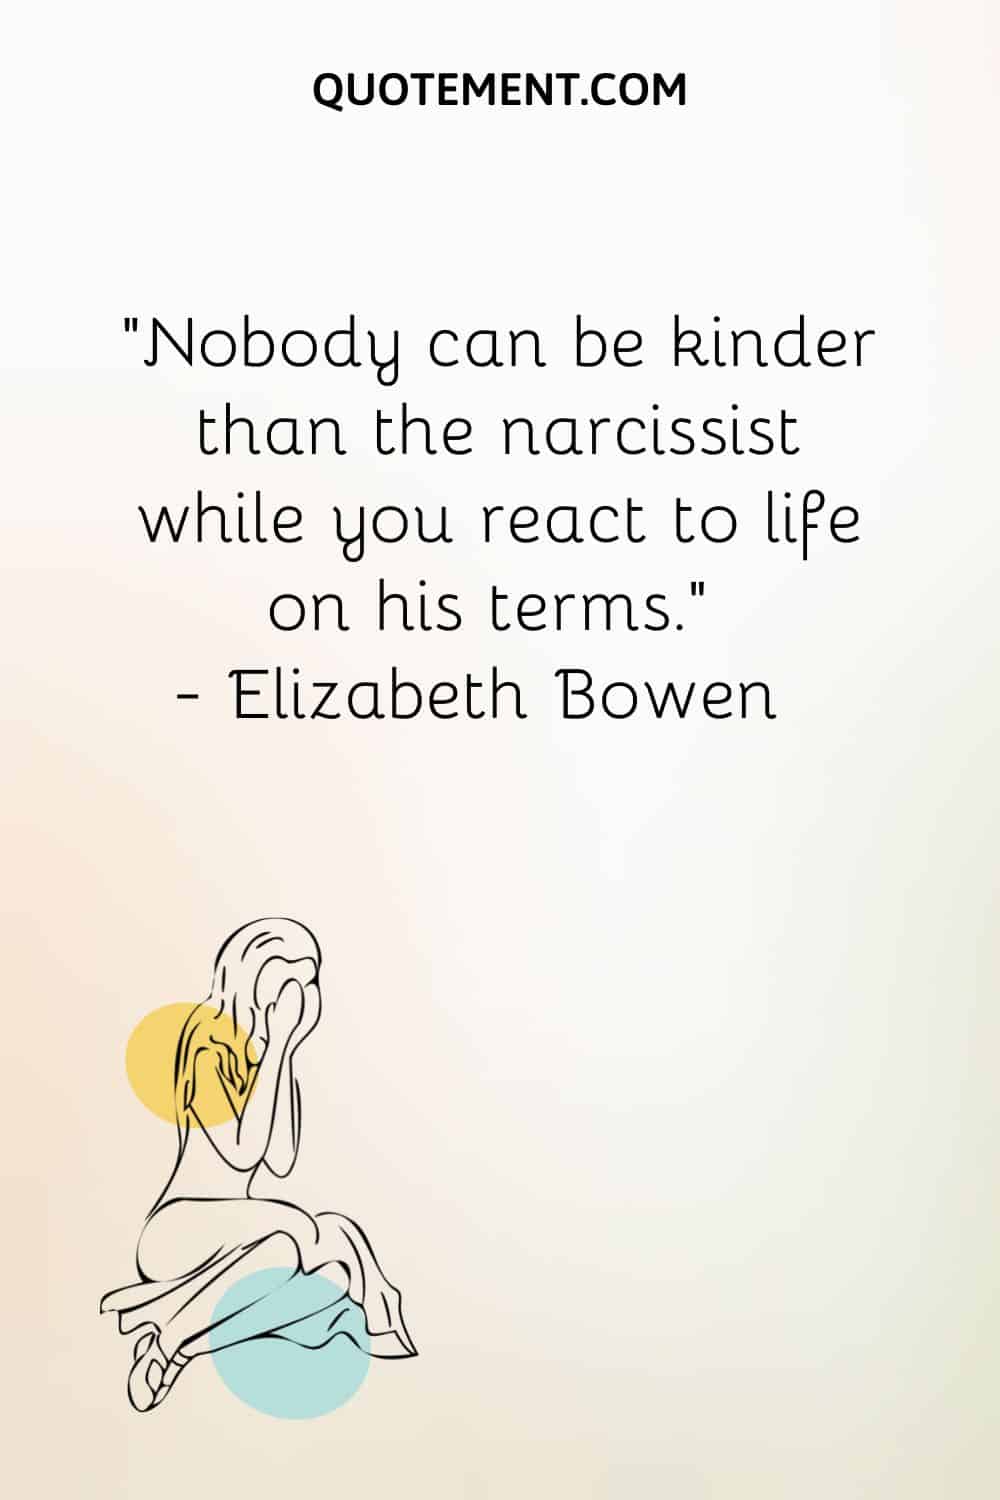 Nobody can be kinder than the narcissist while you react to life on his terms